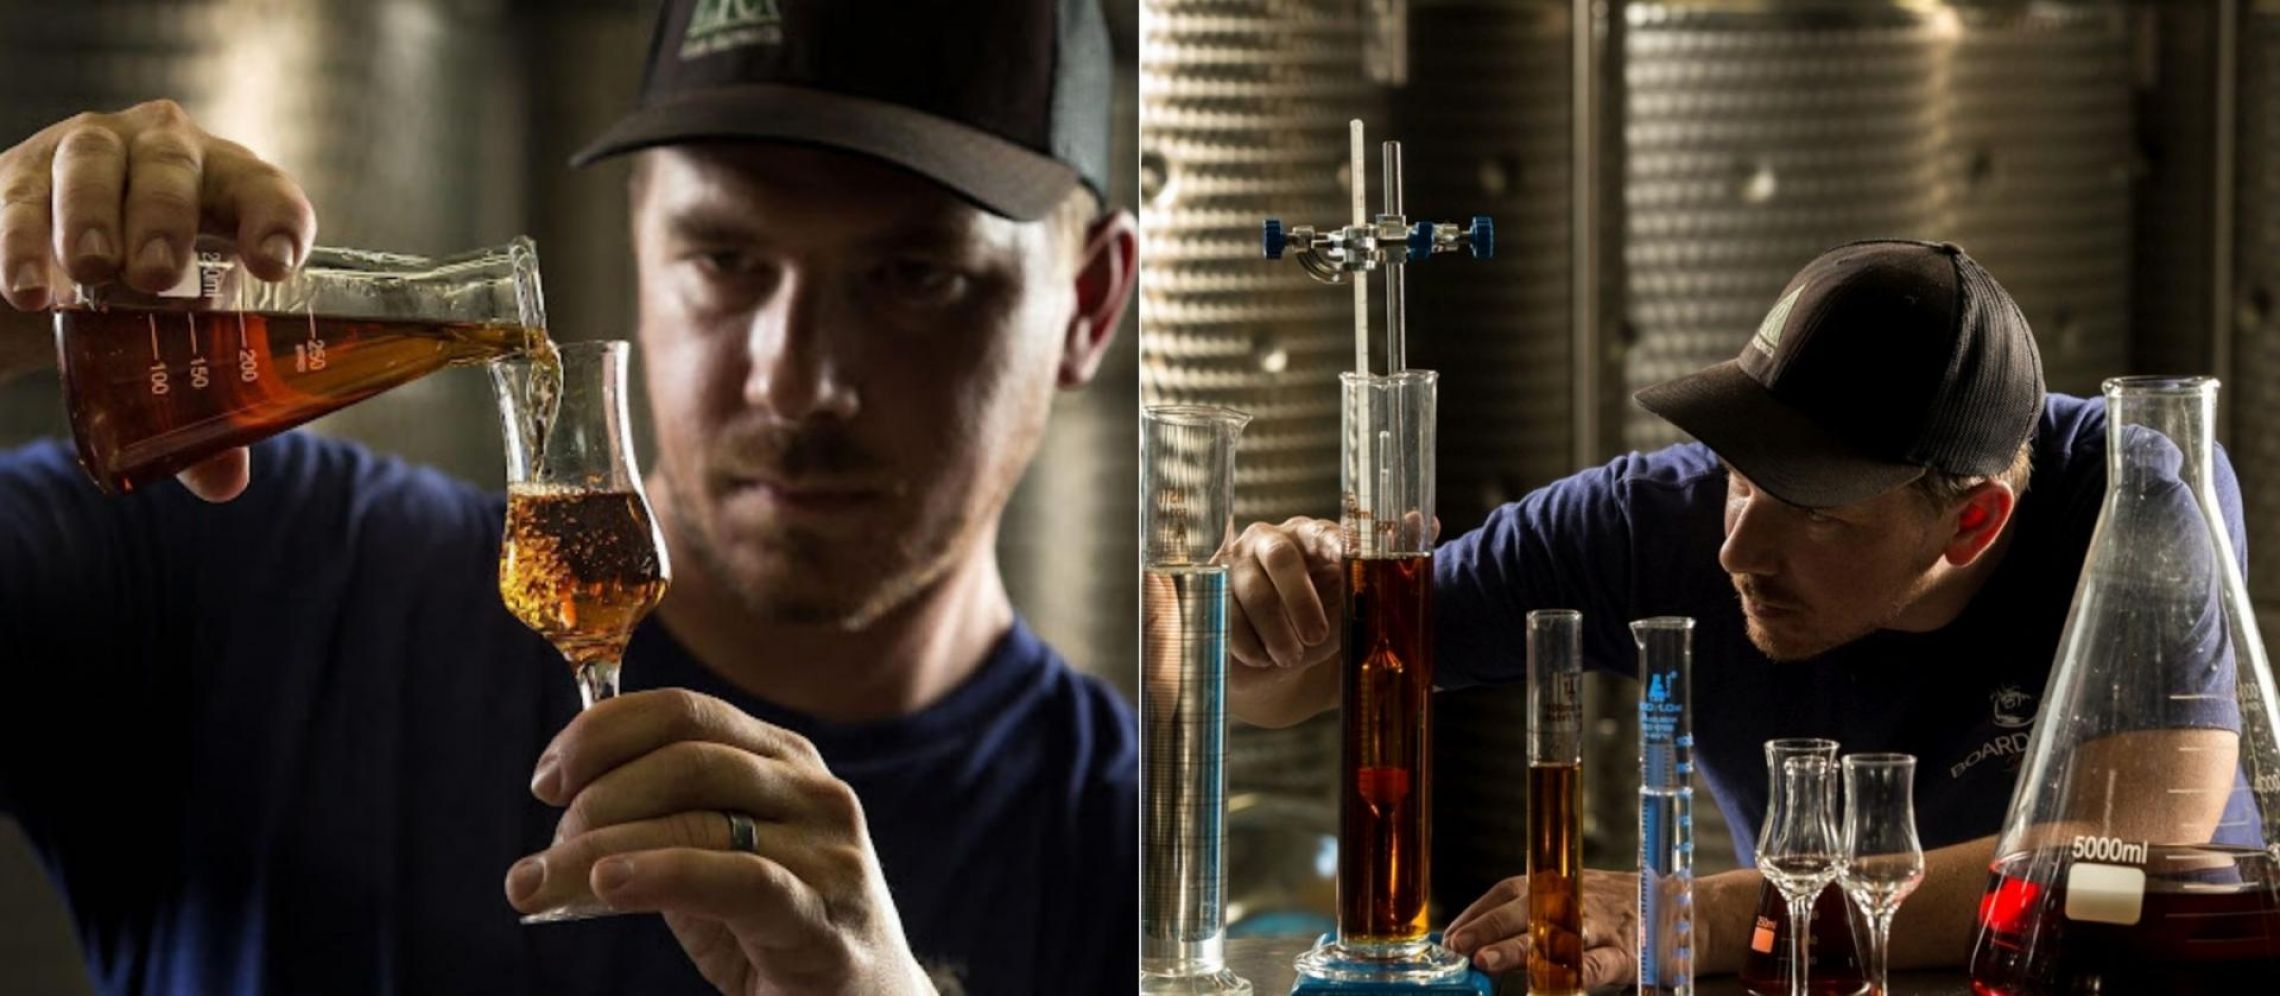 Photo for: Tim Mokes On The Dynamic Role Of A Distiller